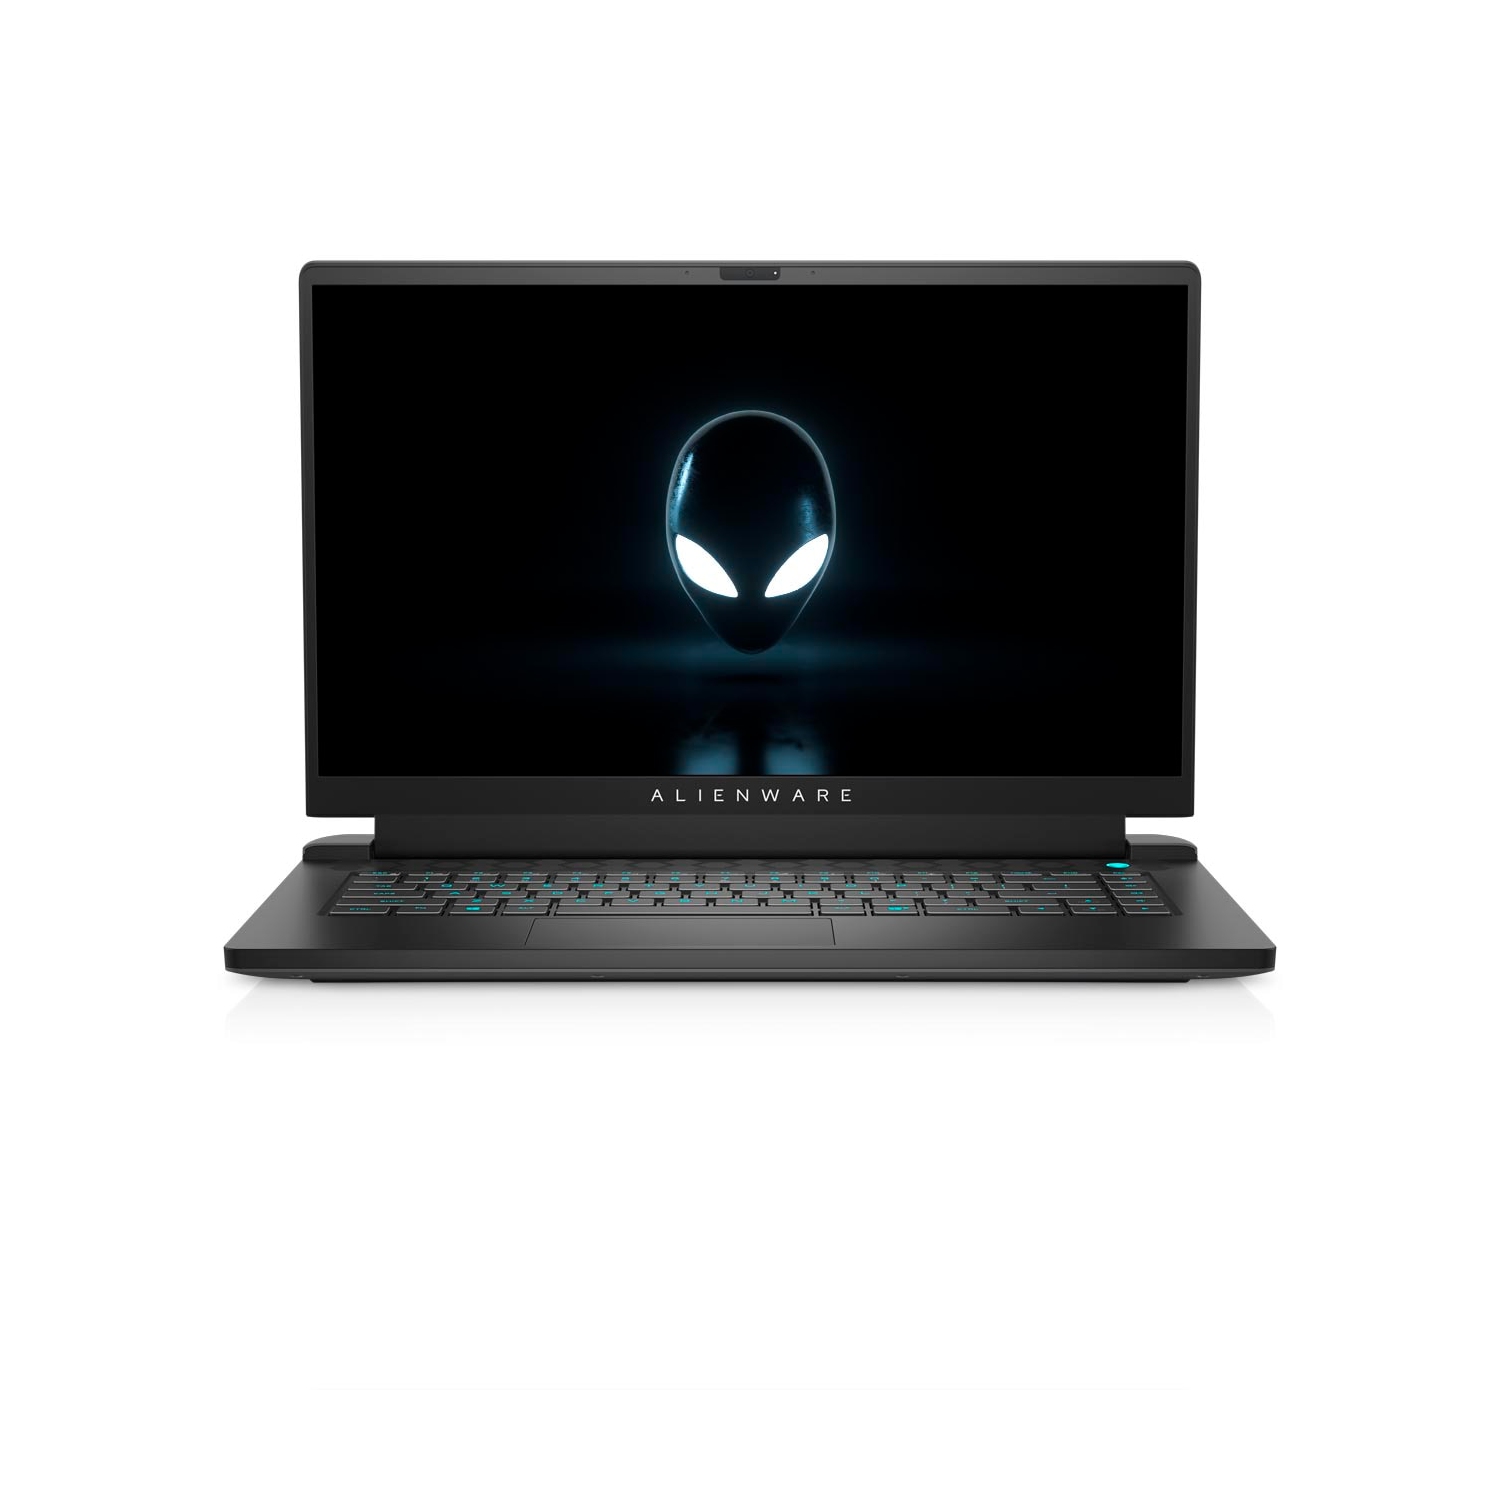 Refurbished (Excellent) - Dell Alienware m15 R5 Ryzen Edition Gaming Laptop (2021), 15.6" FHD, Core Ryzen 9, 1TB SSD, 32GB RAM, RTX 3070, 8 Cores @ 4.6 GHz Certified